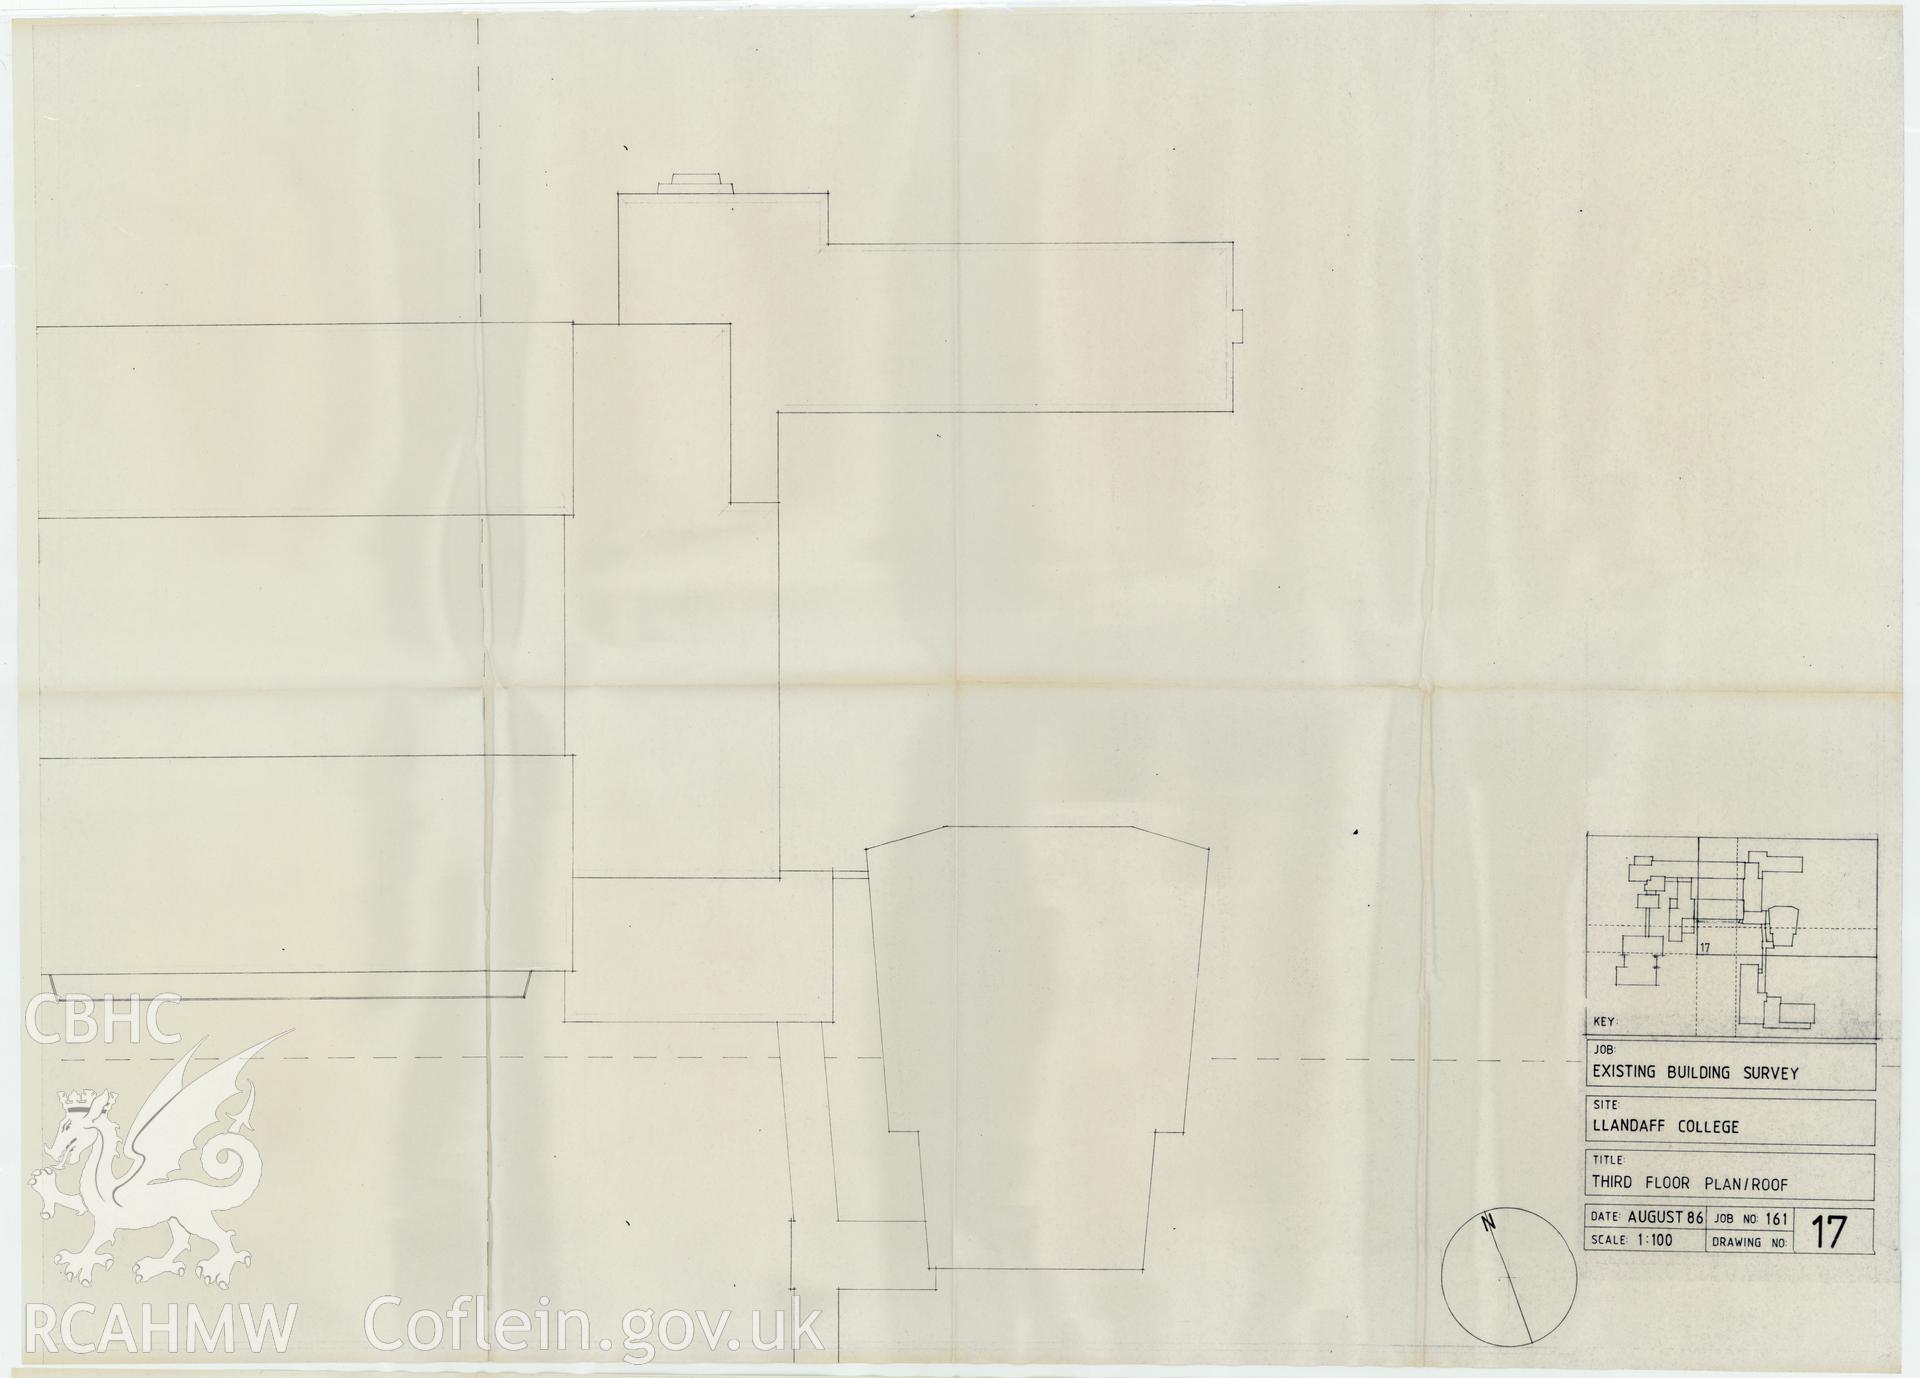 Plan of the third floor of Llandaff College, Cardiff. The existing building survey, August 1986, No 17.